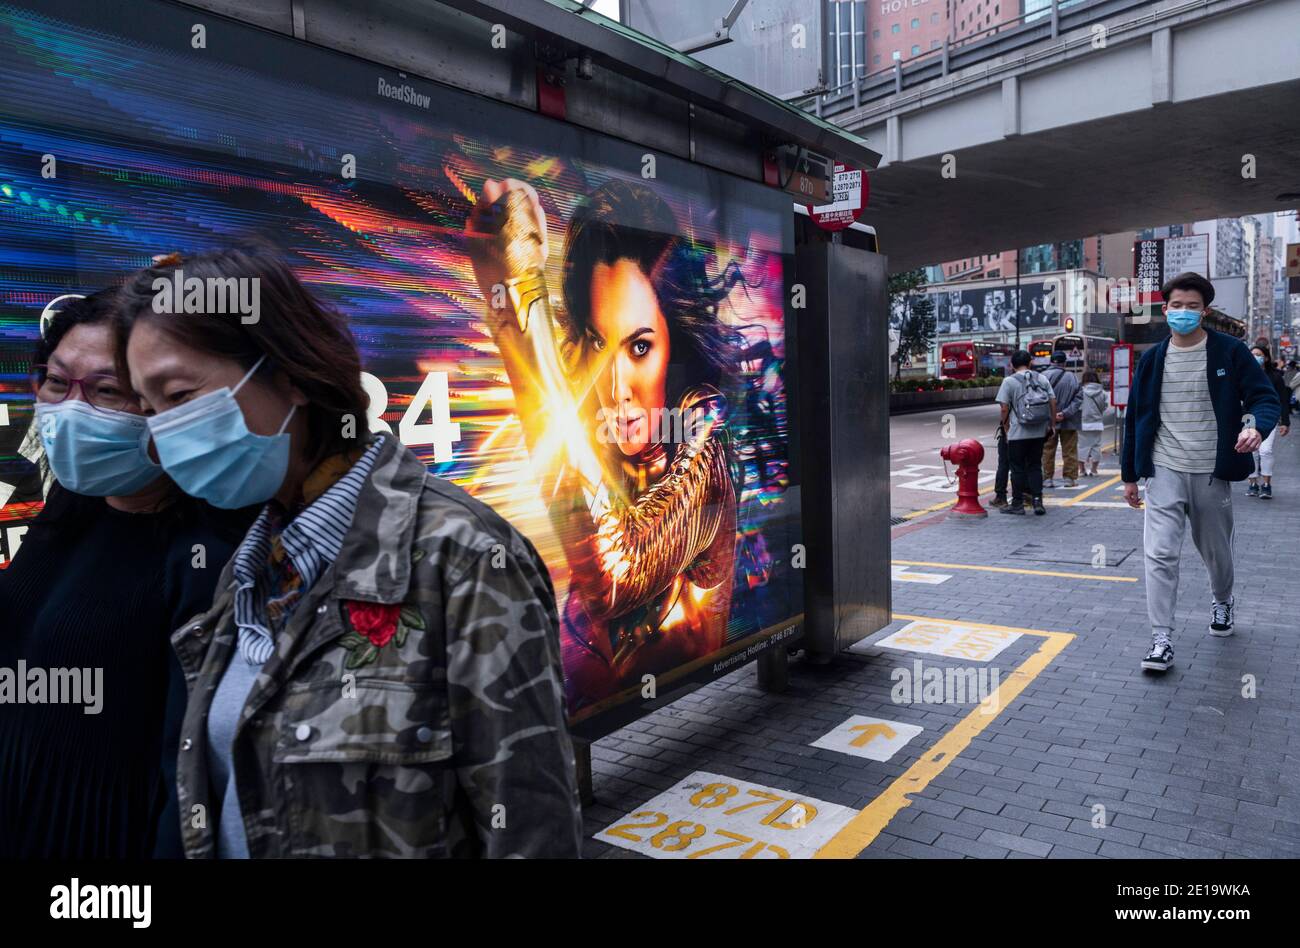 Pedestrians wearing masks walk past an advertisement billboard from Warner Bros Official Site and DC comics character Wonder Woman 1984 movie in Hong Kong. Stock Photo